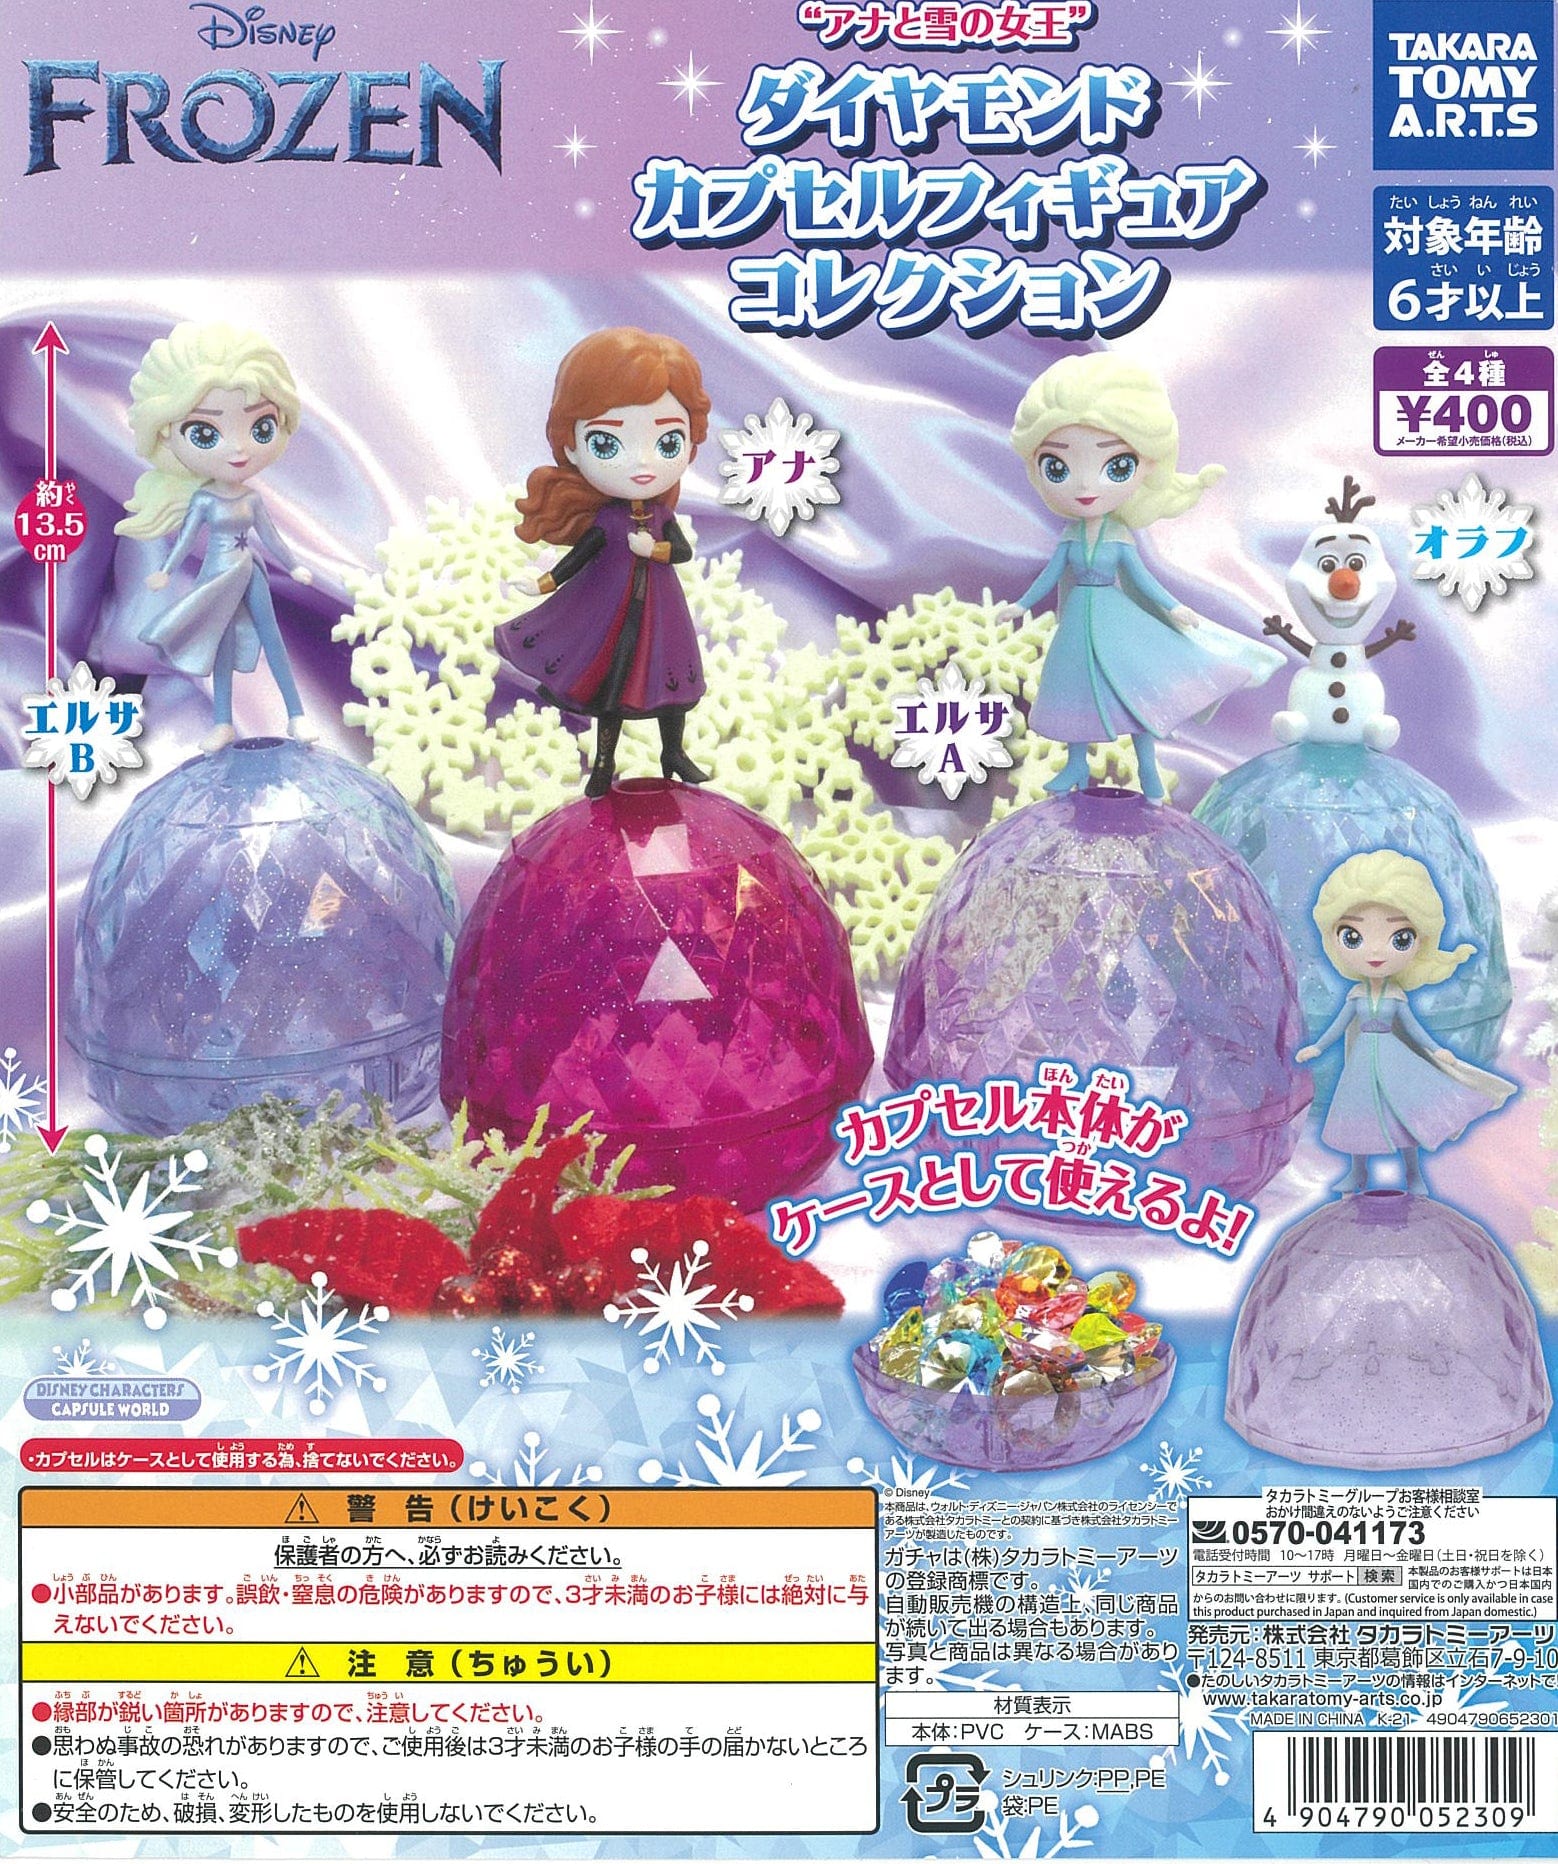 Takara Tomy A.R.T.S CP1467 Frozen II Diamond Capsule Figure Collection